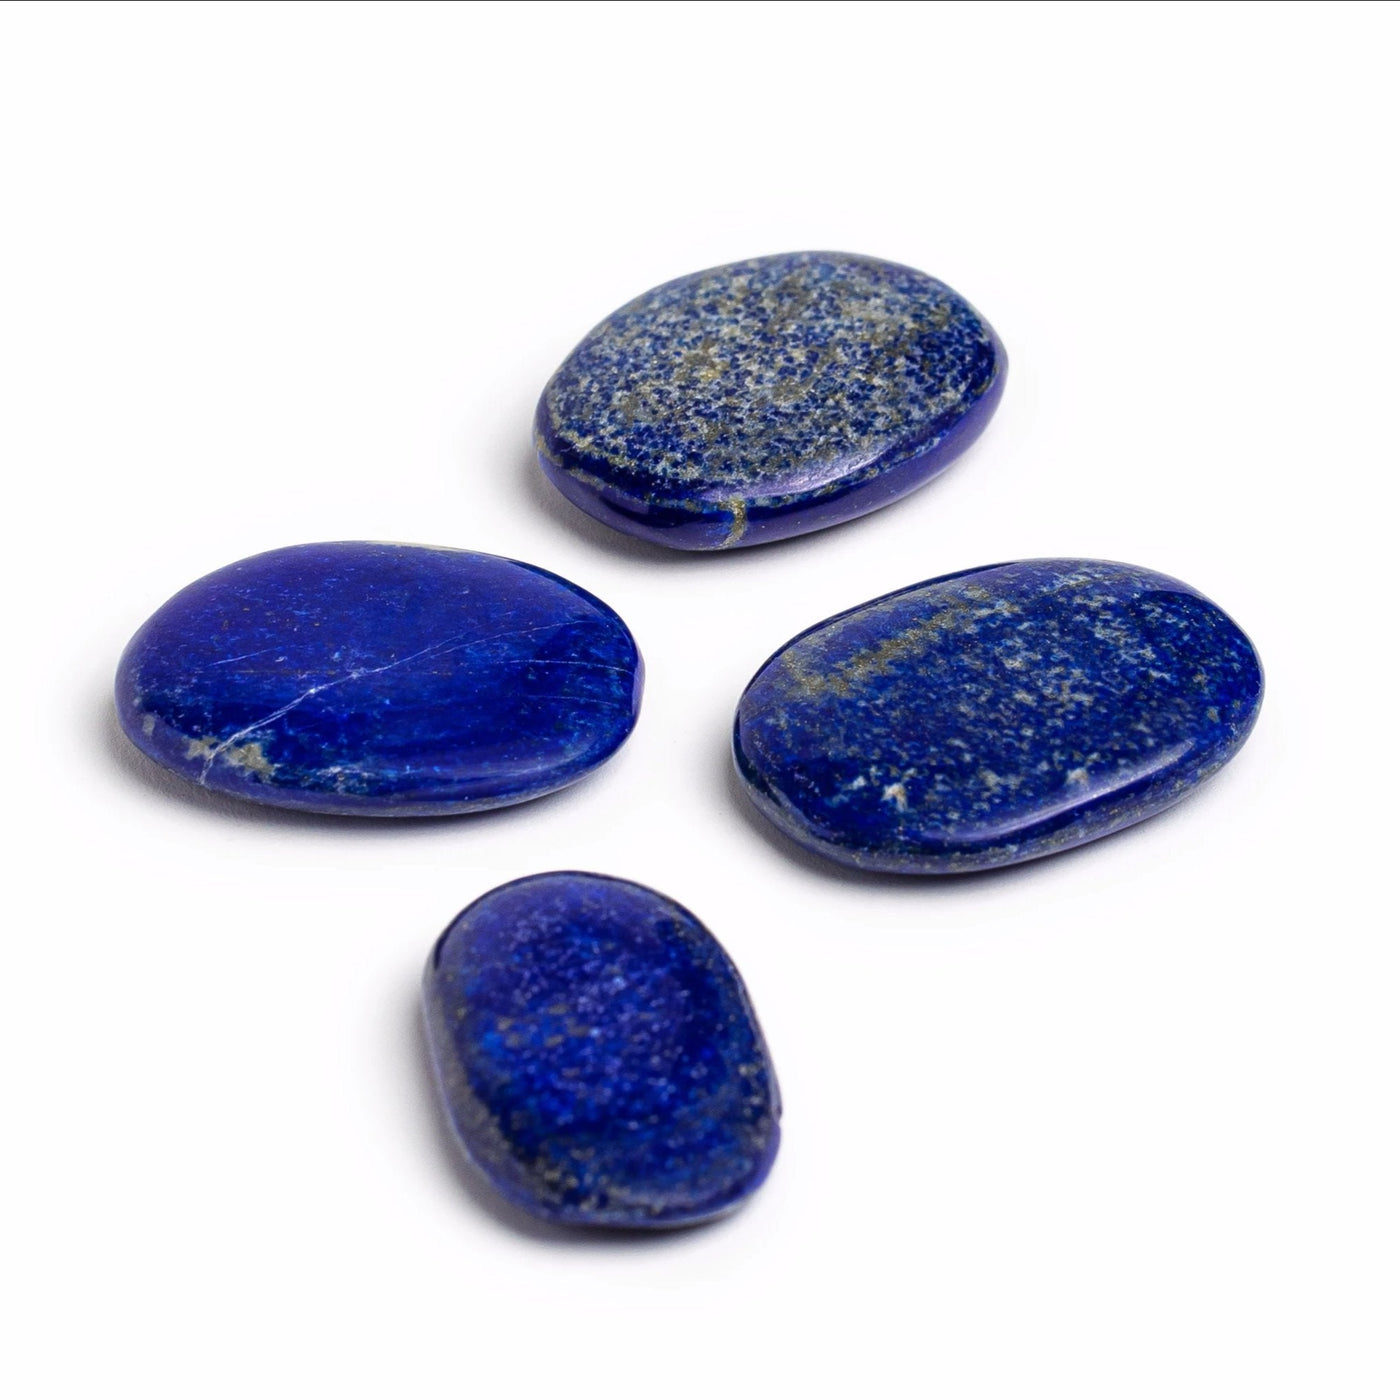 group of 4 genuine lapis lazuli by Energy Muse showing coloration variety